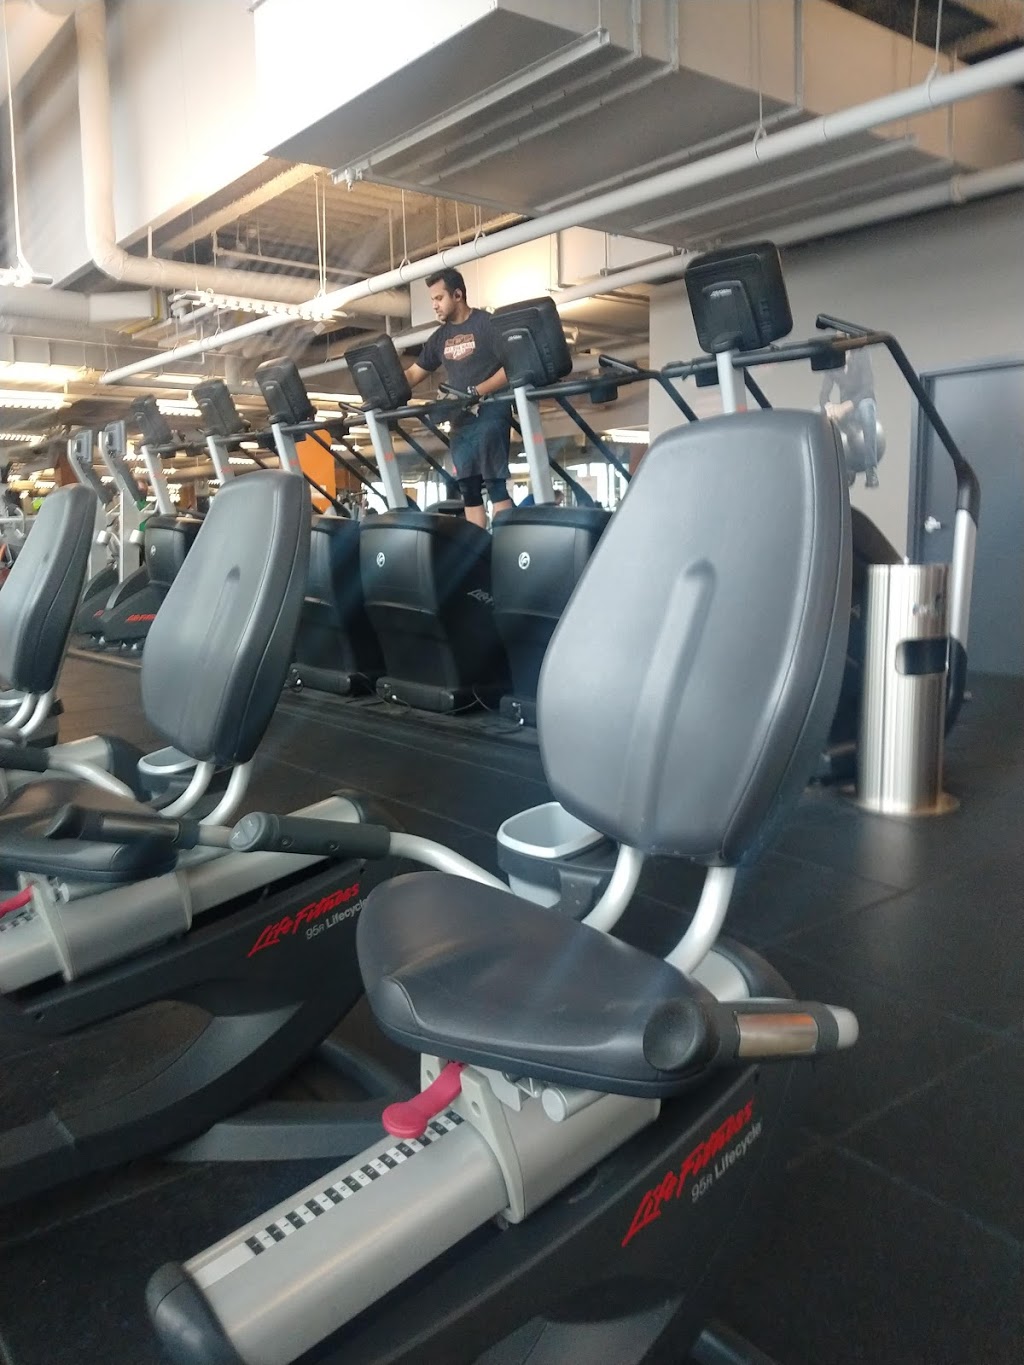 Club16 Trevor Linden Fitness Downtown | gym | 1055 Canada Pl #50, Vancouver, BC V6C 0C3, Canada | 6045581600 OR +1 604-558-1600